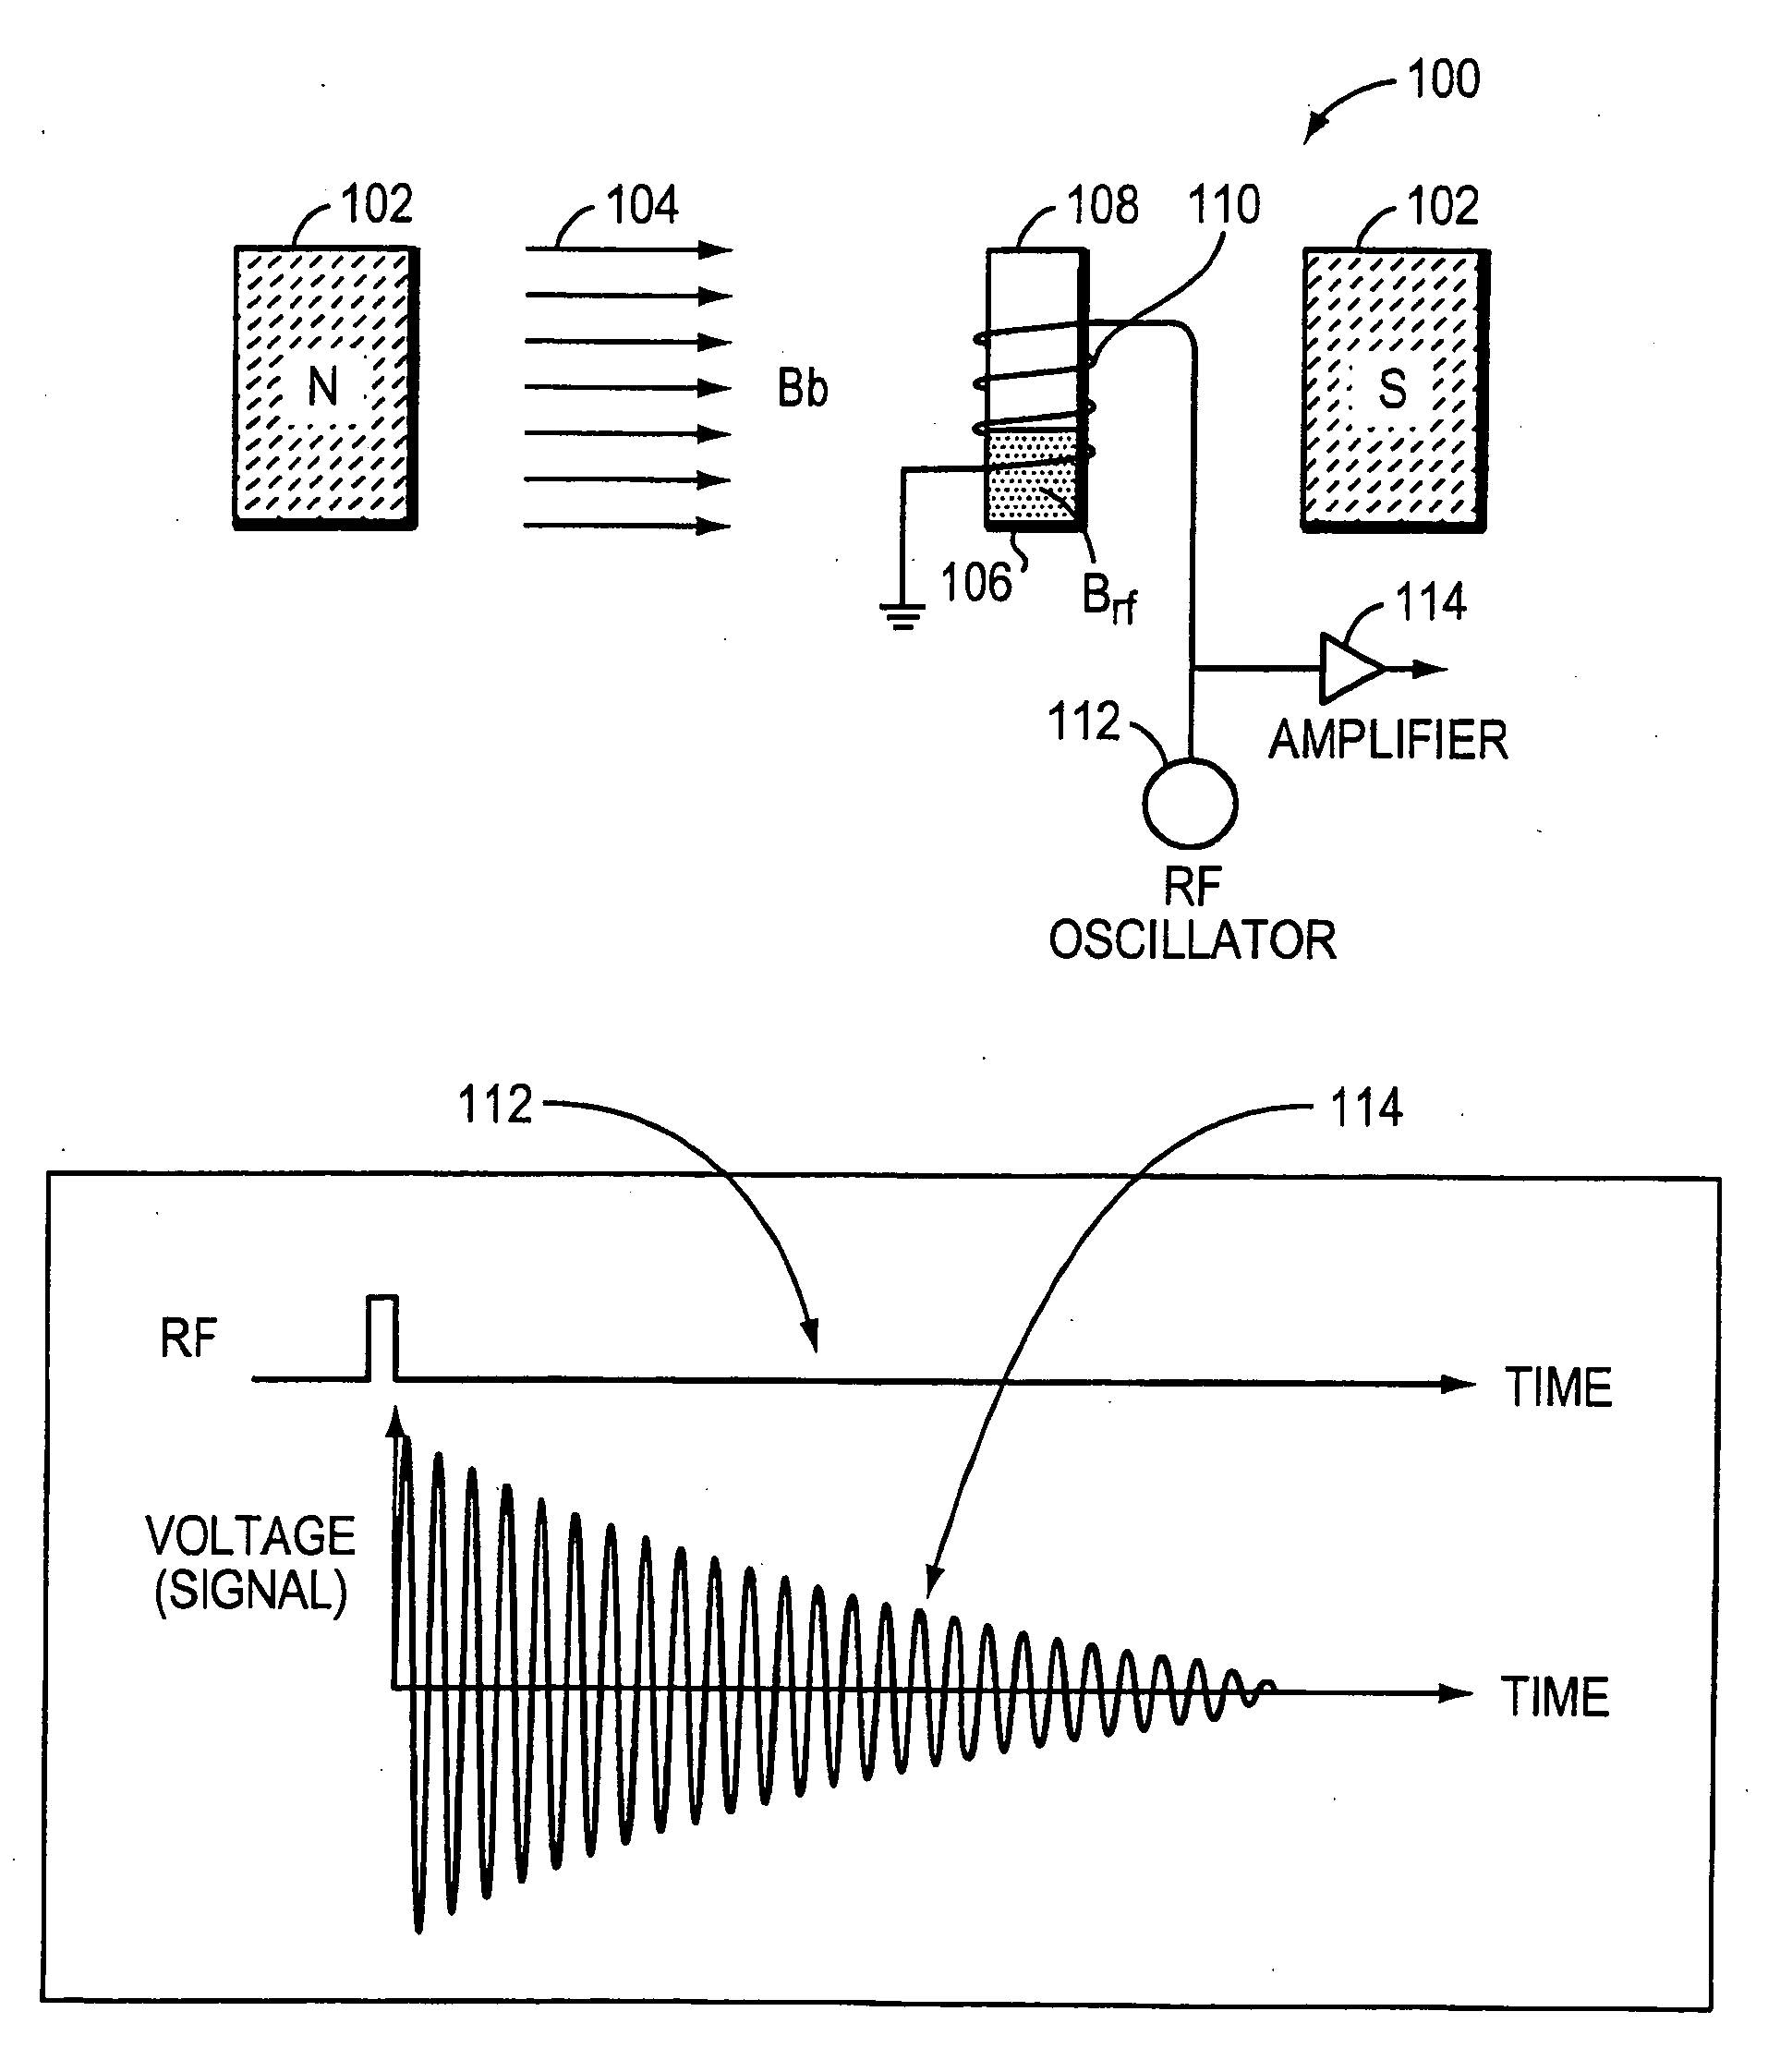 NMR device for detection of analytes